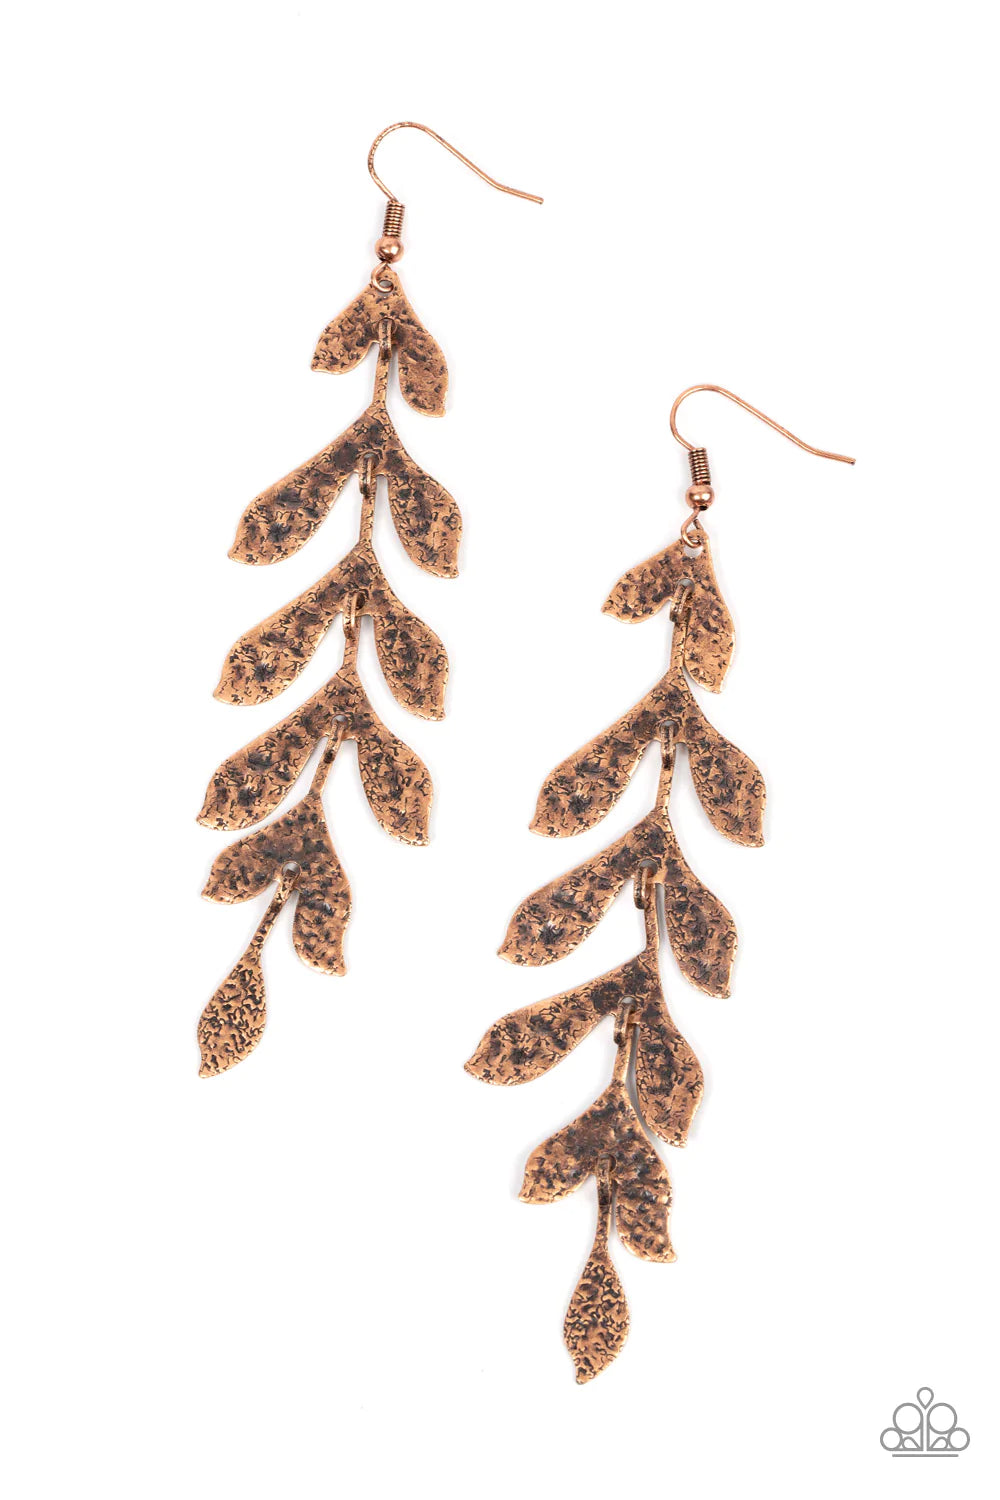 Paparazzi Accessories Lead From the FROND - Copper Hammered in a rustic finish, antiqued copper frames delicately link into a leafy lure for a seasonal inspired style. Earring attaches to a standard fishhook fitting. Sold as one pair of earrings.